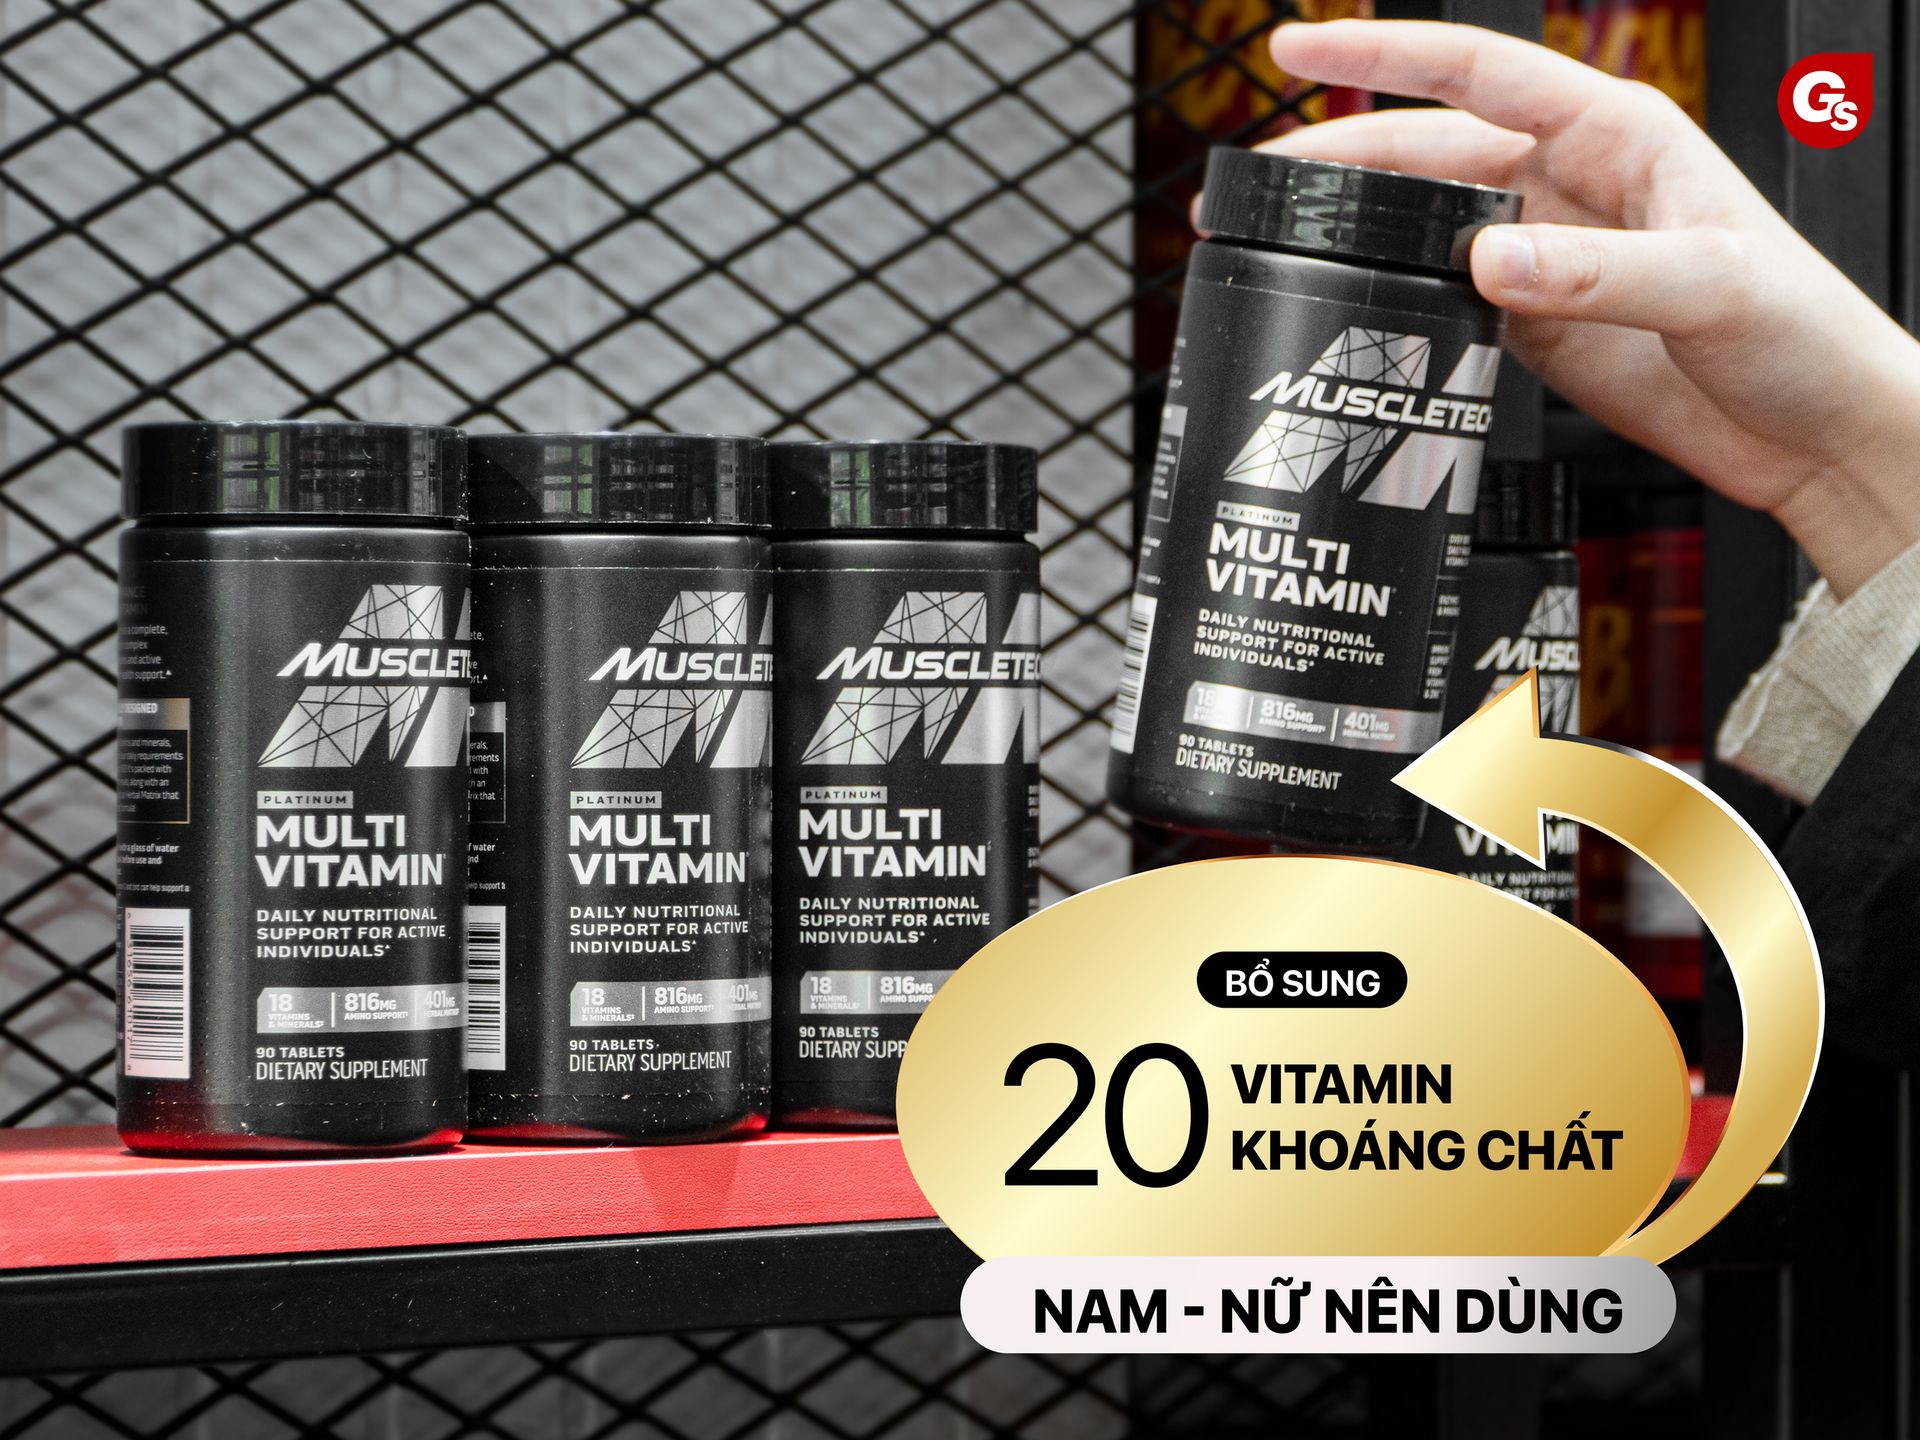 danh-gia-review-muscletech-platinum-vitamin-gymstore-3